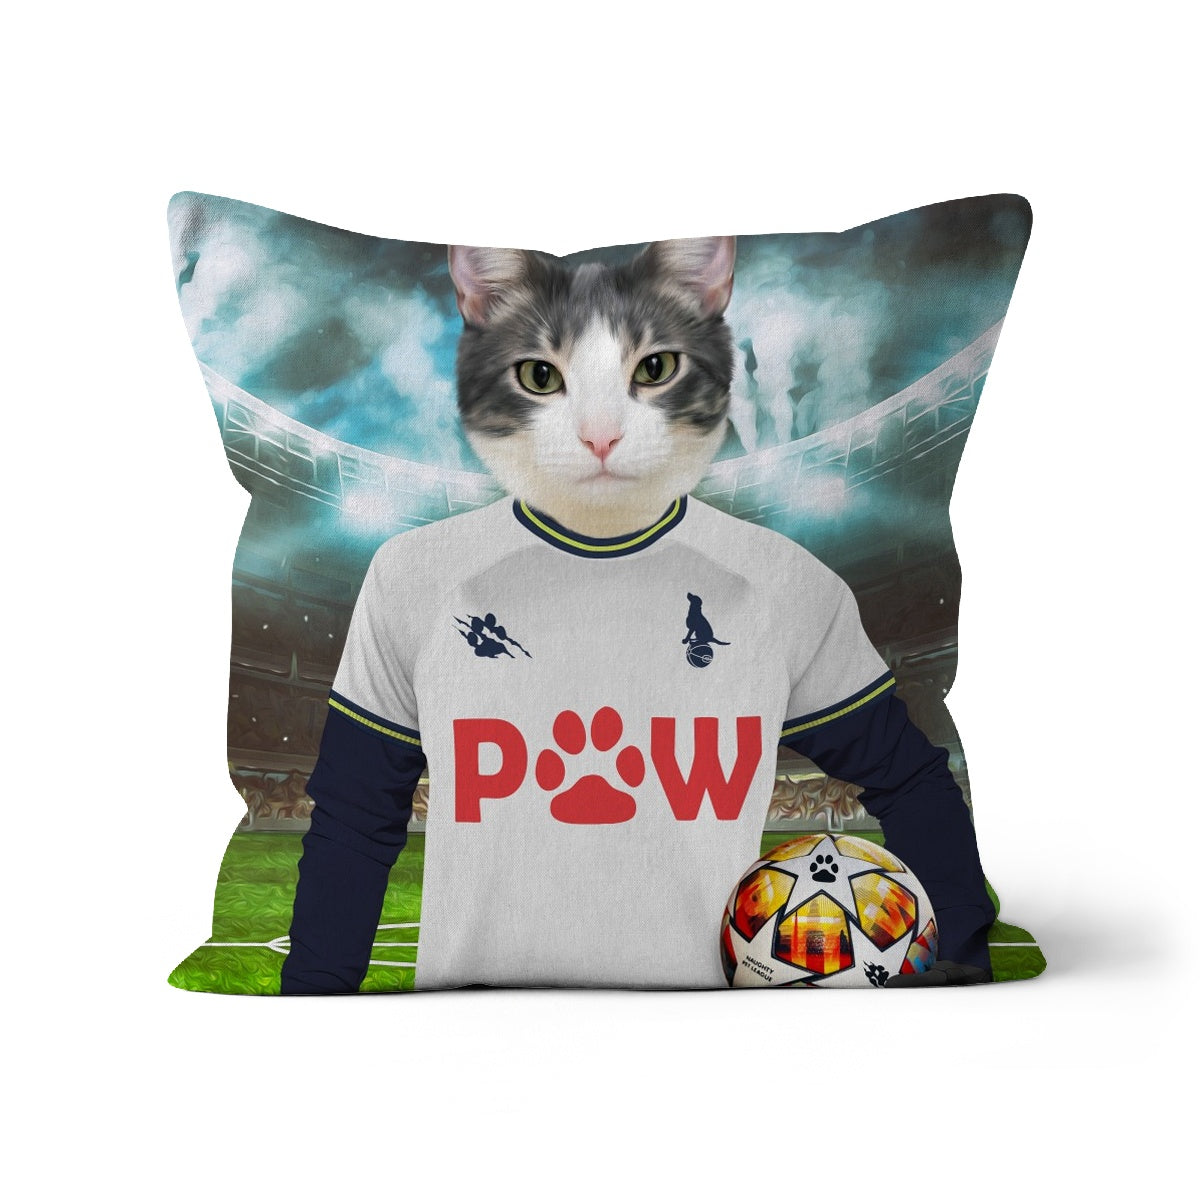 Tottenham Hotspaw Football Club Paw & Glory, pawandglory, photo dog pillows, pillows with dogs picture, create your own pillow, best pet pillow, dog on cushion, photo pet pillow, Pet Portraits cushion,